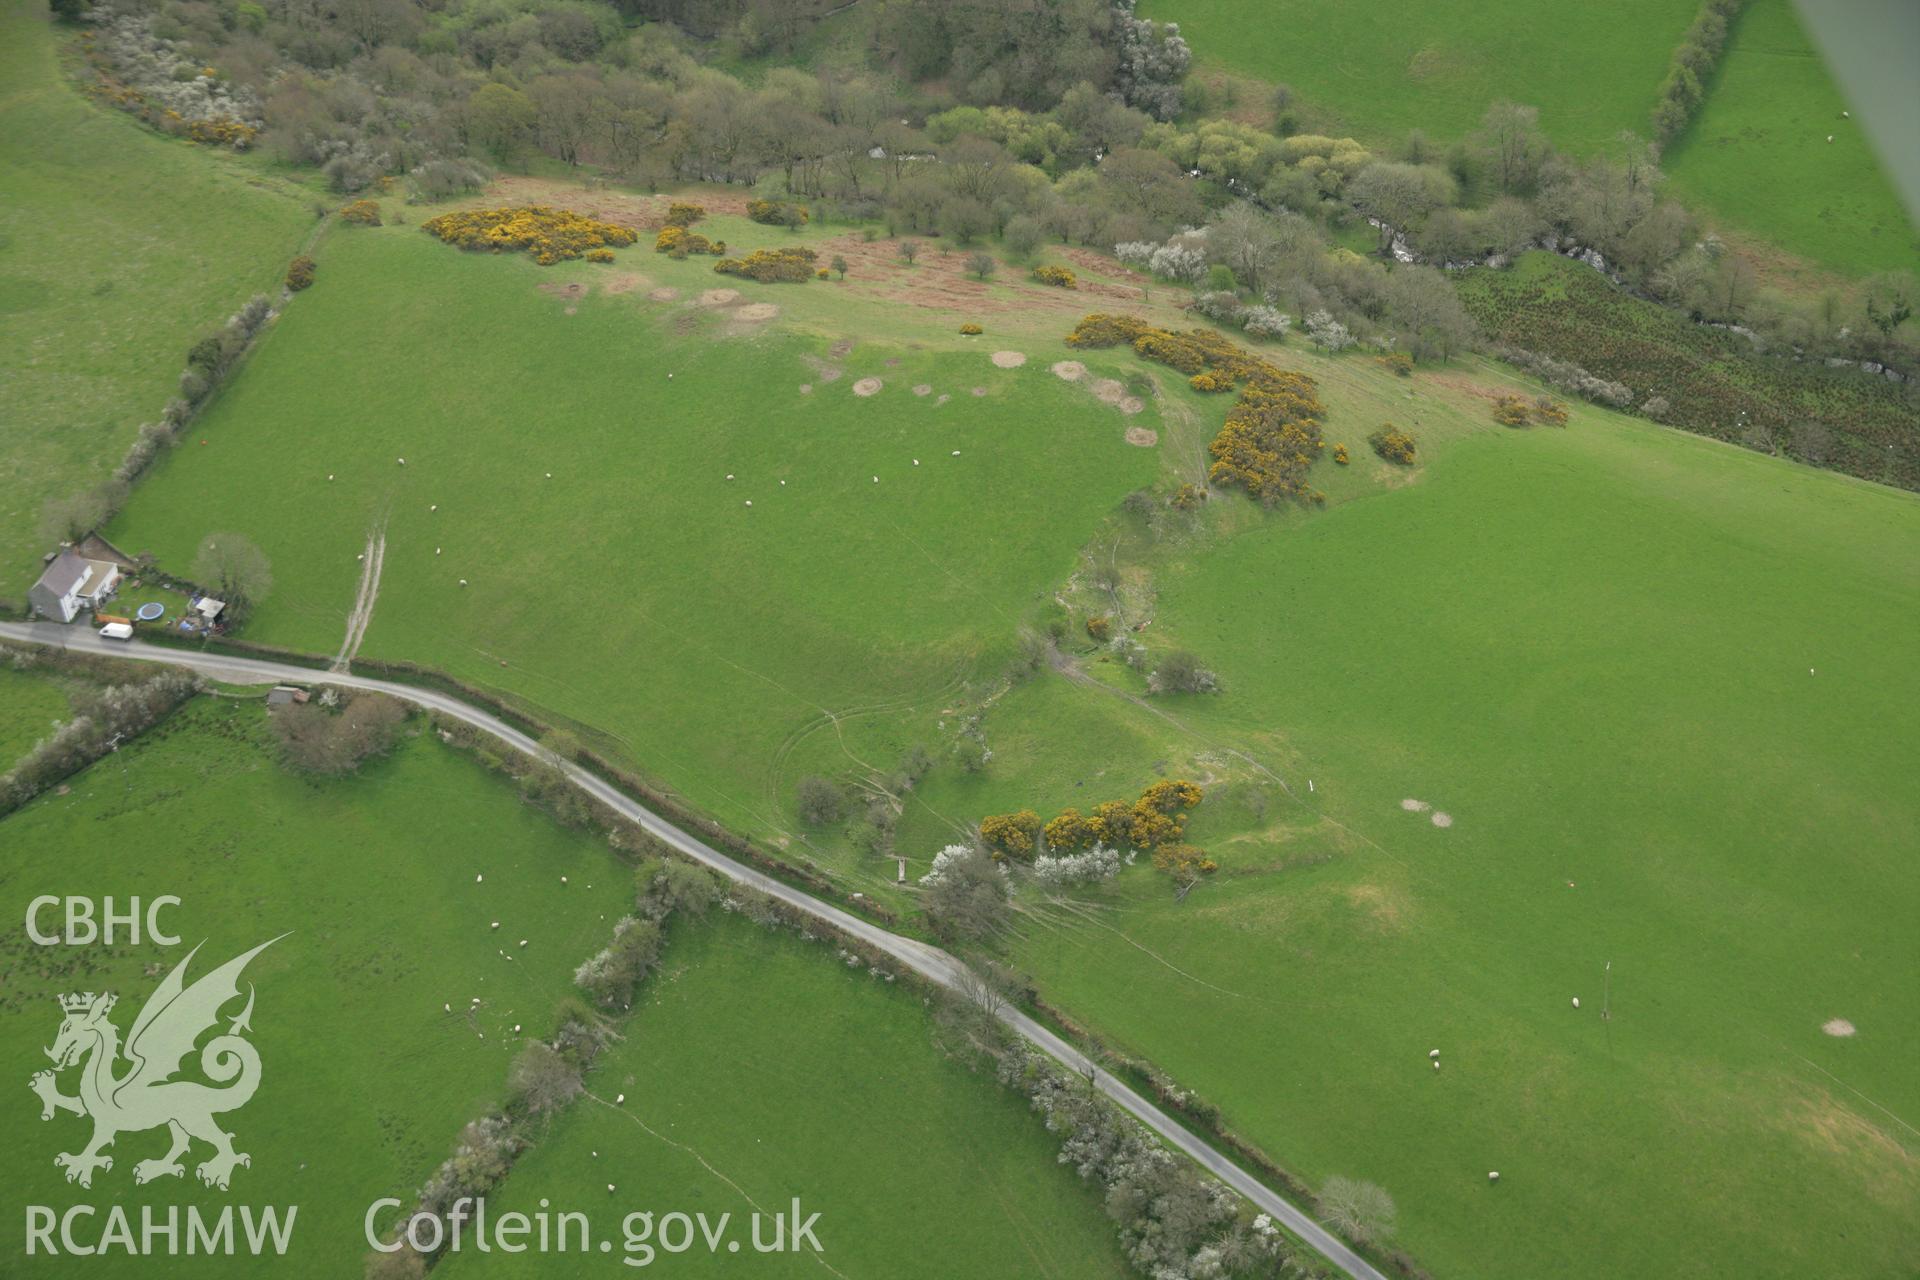 RCAHMW colour oblique aerial photograph of Caer Argoed Hillfort. Taken on 17 April 2007 by Toby Driver